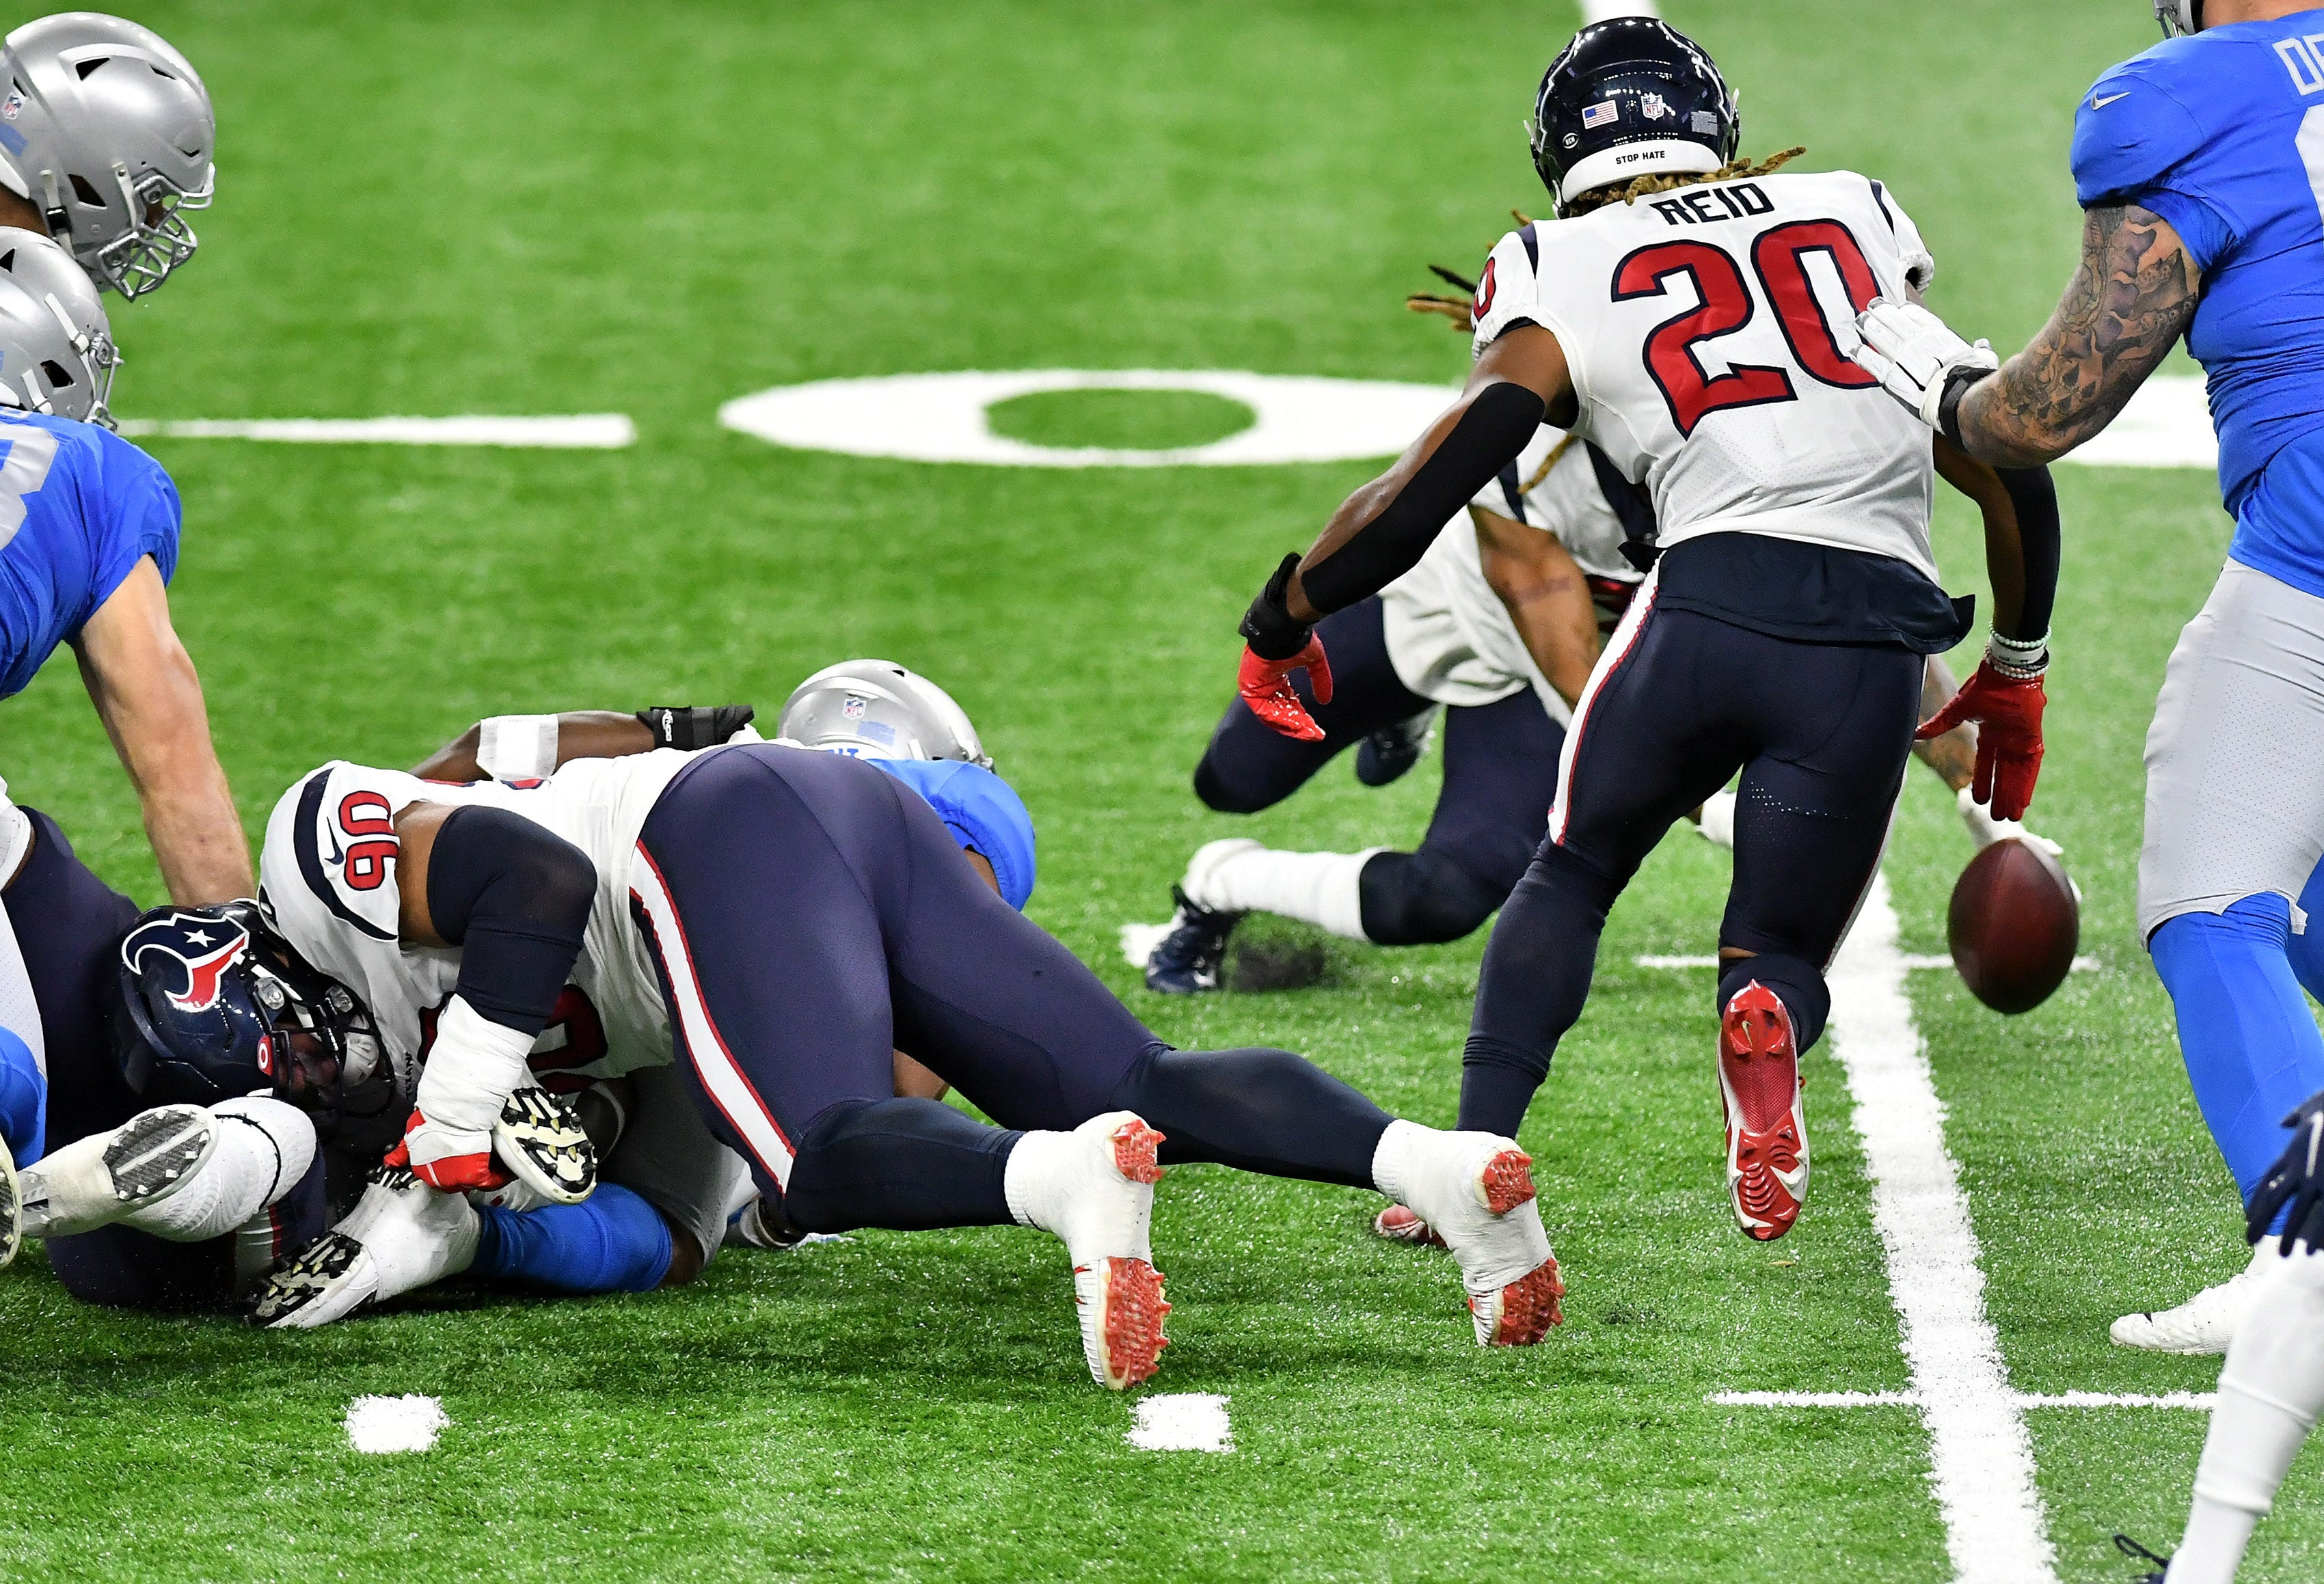 Texans cornerback Bradley Roby (21), rear and Texans strong safety Justin Reid (20) about to recover a fumble by Lions running back Jonathan Williams (41) under Texans defensive tackle Ross Blacklock (90) in the first half.